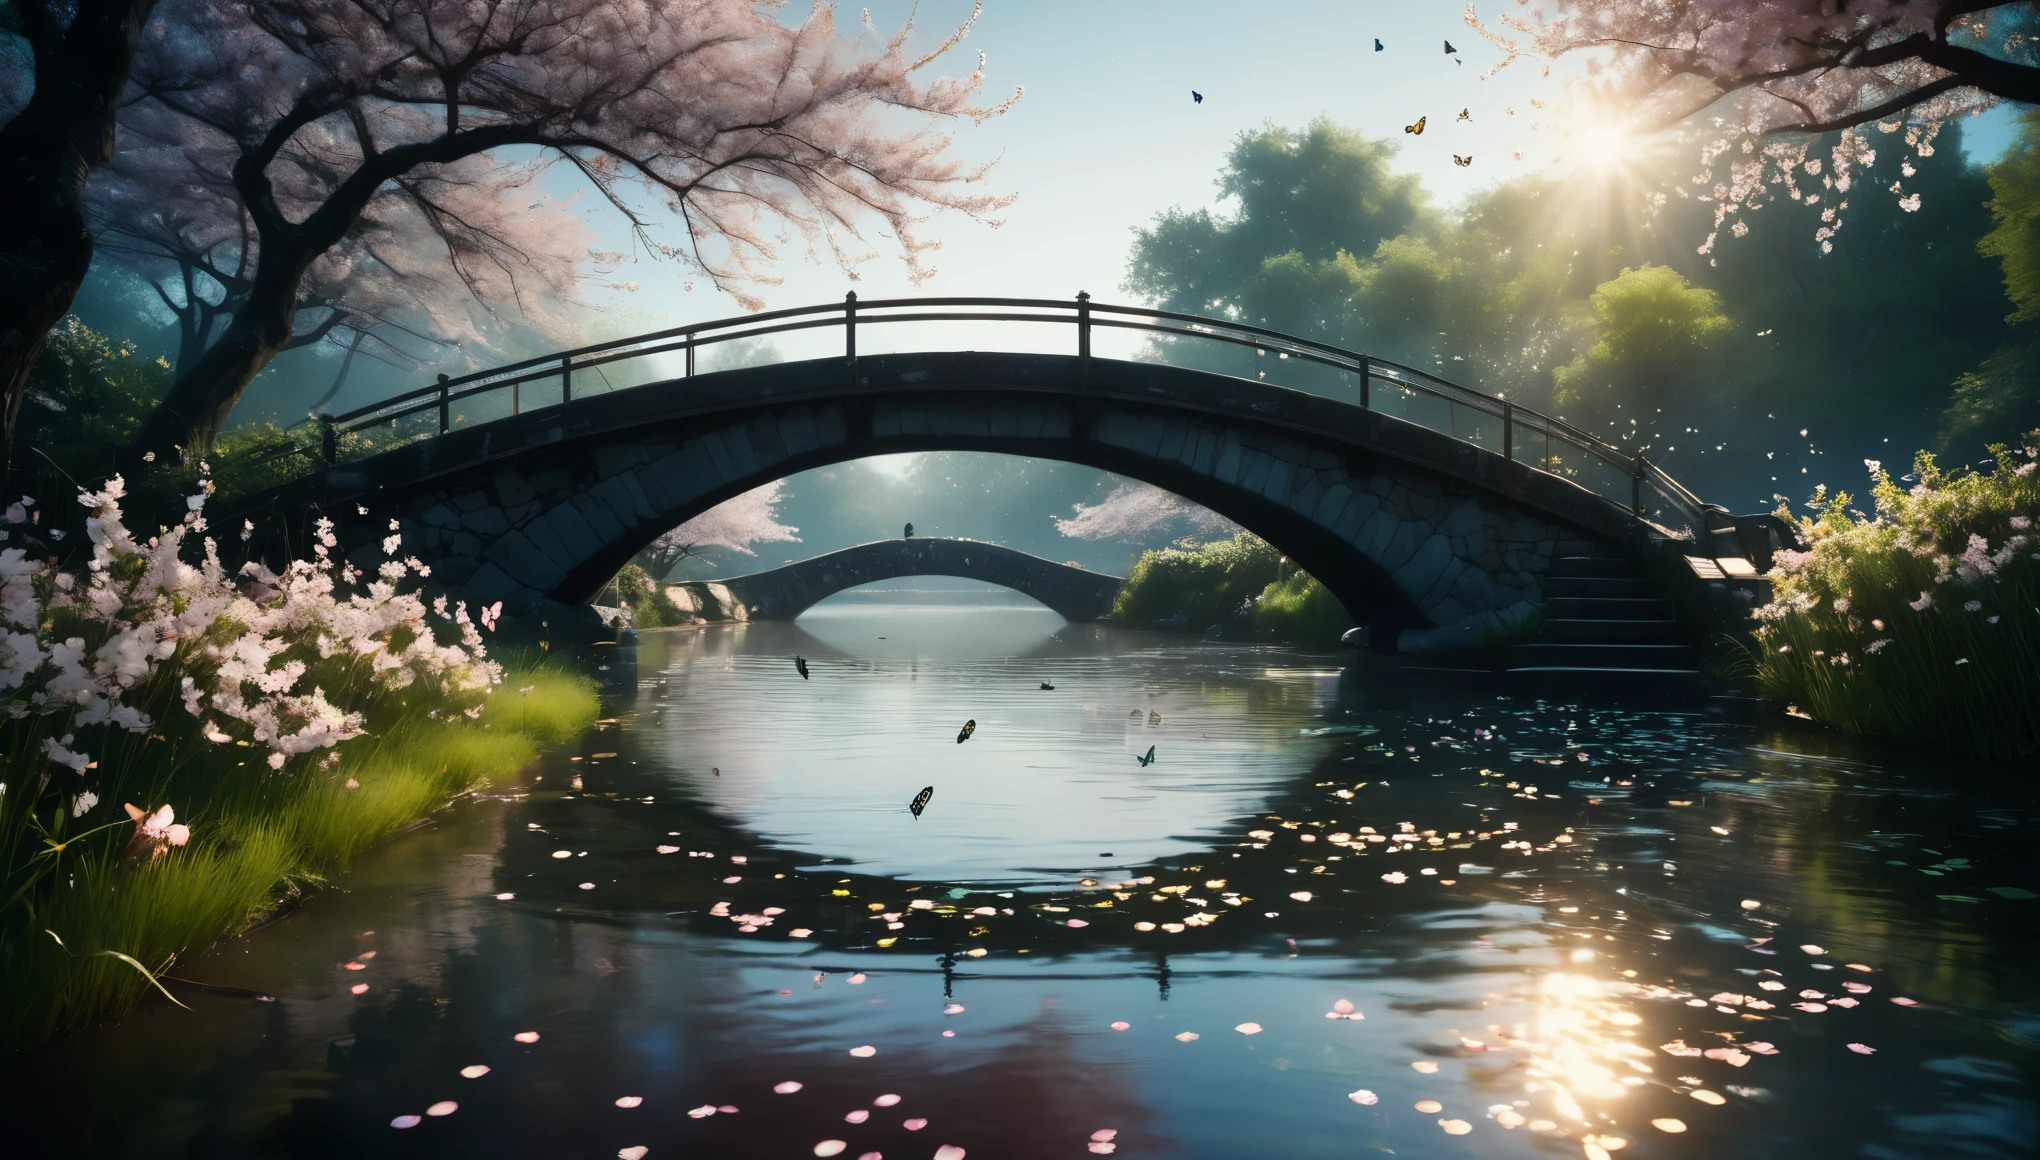 sharp focus,spring morning,bridge over the pond,clear water,flower,falling cherry blossom petals,glowing butterflies,fireflies,bioluminescent,Masterpiece,highest quality,photo,color grading,by lee jeffries,nikon d850,film stock photograph 4,kodak portra 400,f 1.6, rich colors,ultra-realistic,lifelike textures,dramatic lighting,unreal engine,cinestill 800